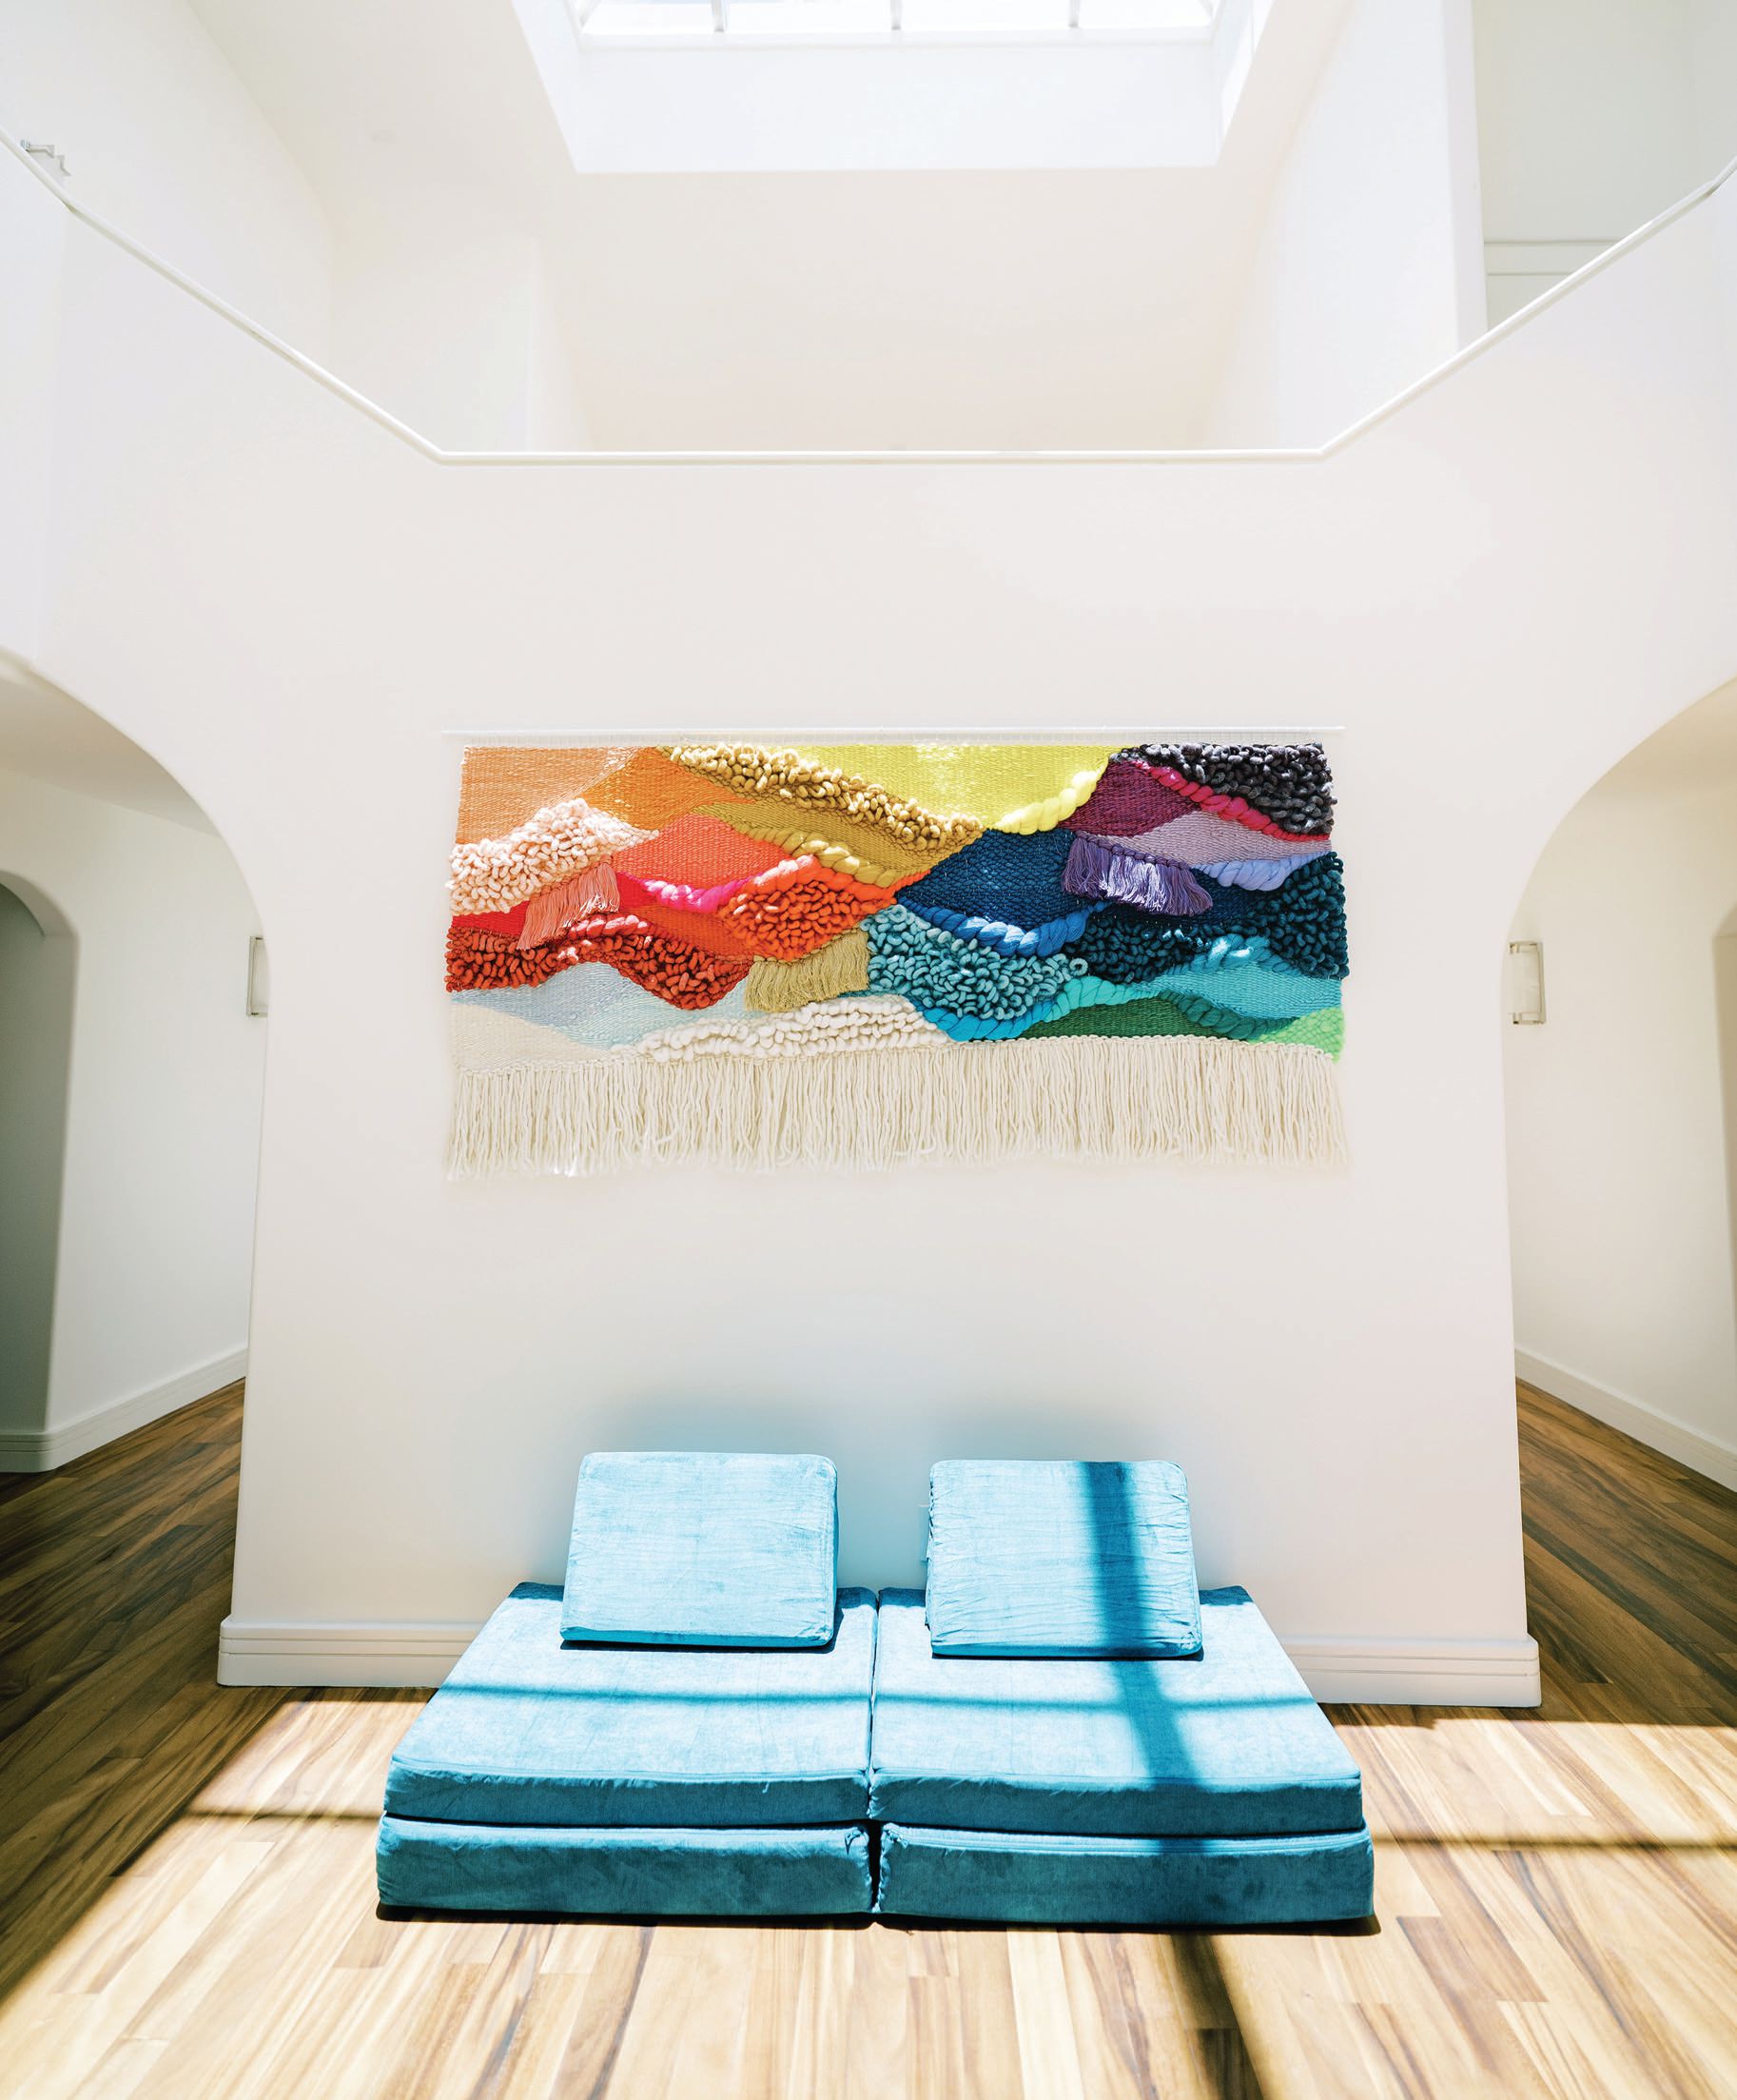 A custom art piece by Australian Maryanne Moodie (maryannemoodie.com) commands the entryway. PHOTOGRAPHED BY MEGAN MOURA